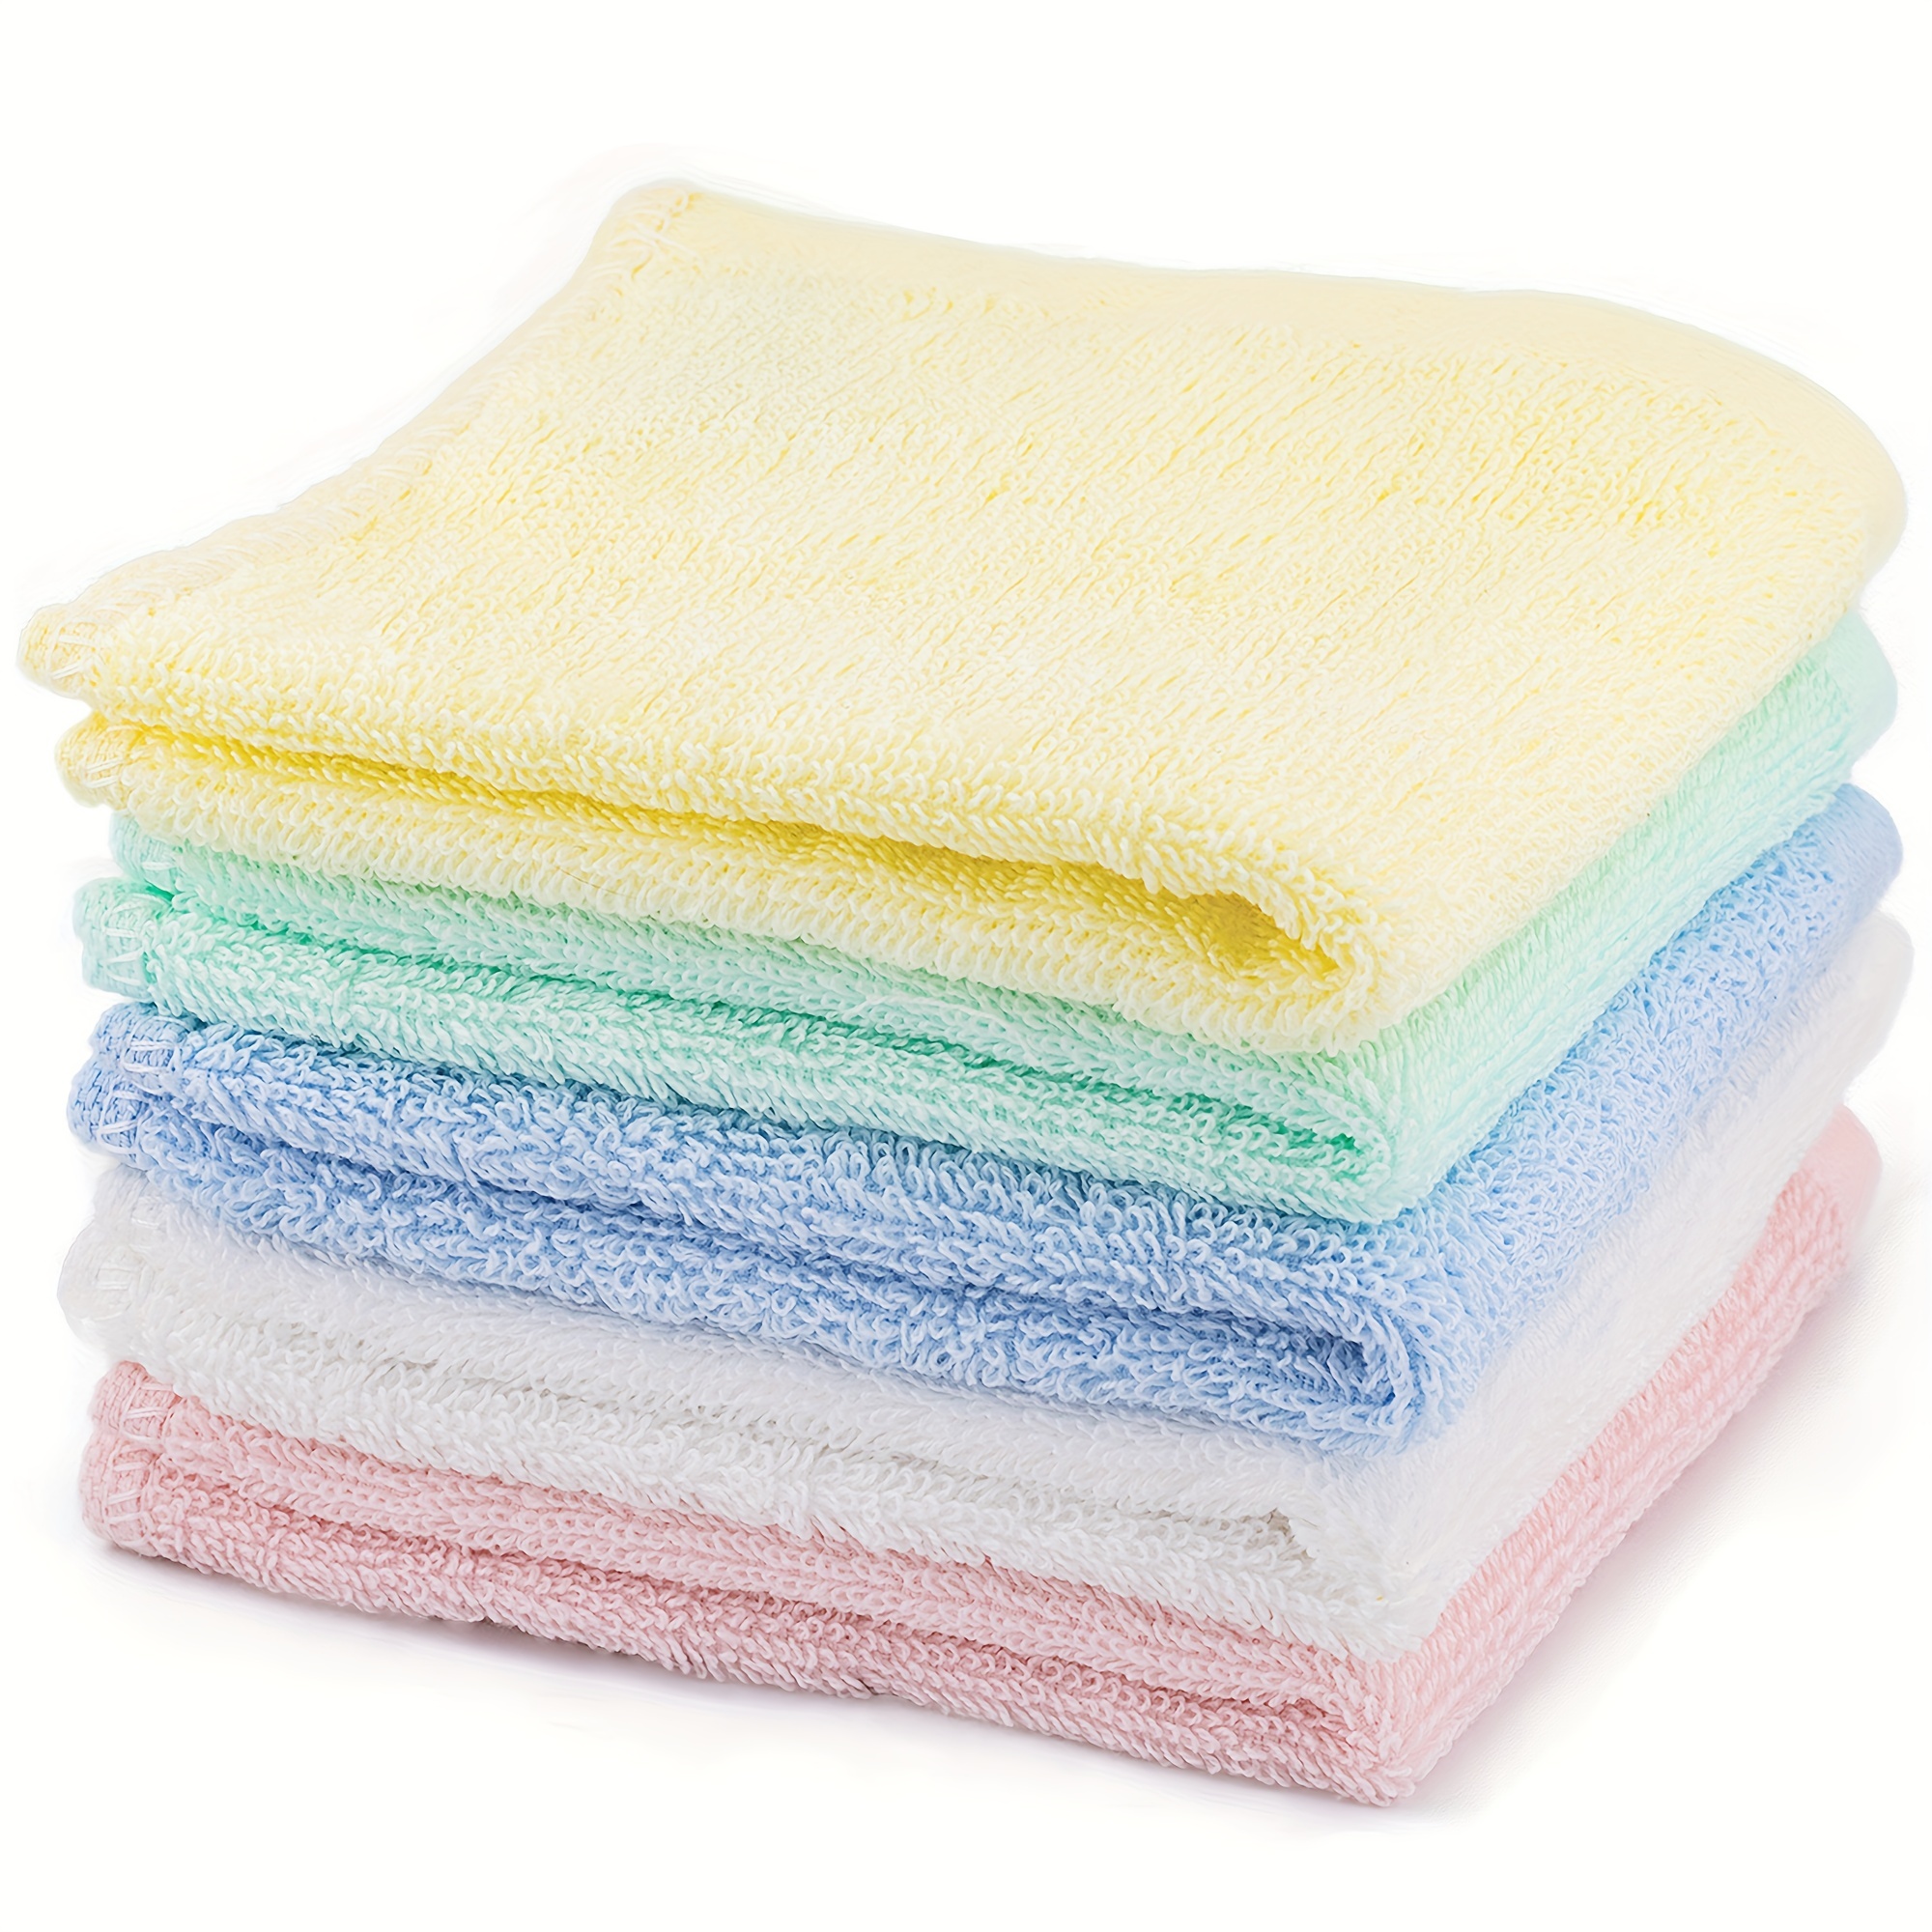 10 Kitchen towels and dishcloths rag set 9.84in*9.84in small dish towels  for washing dishes dish rags for everyday cooking baking-random color